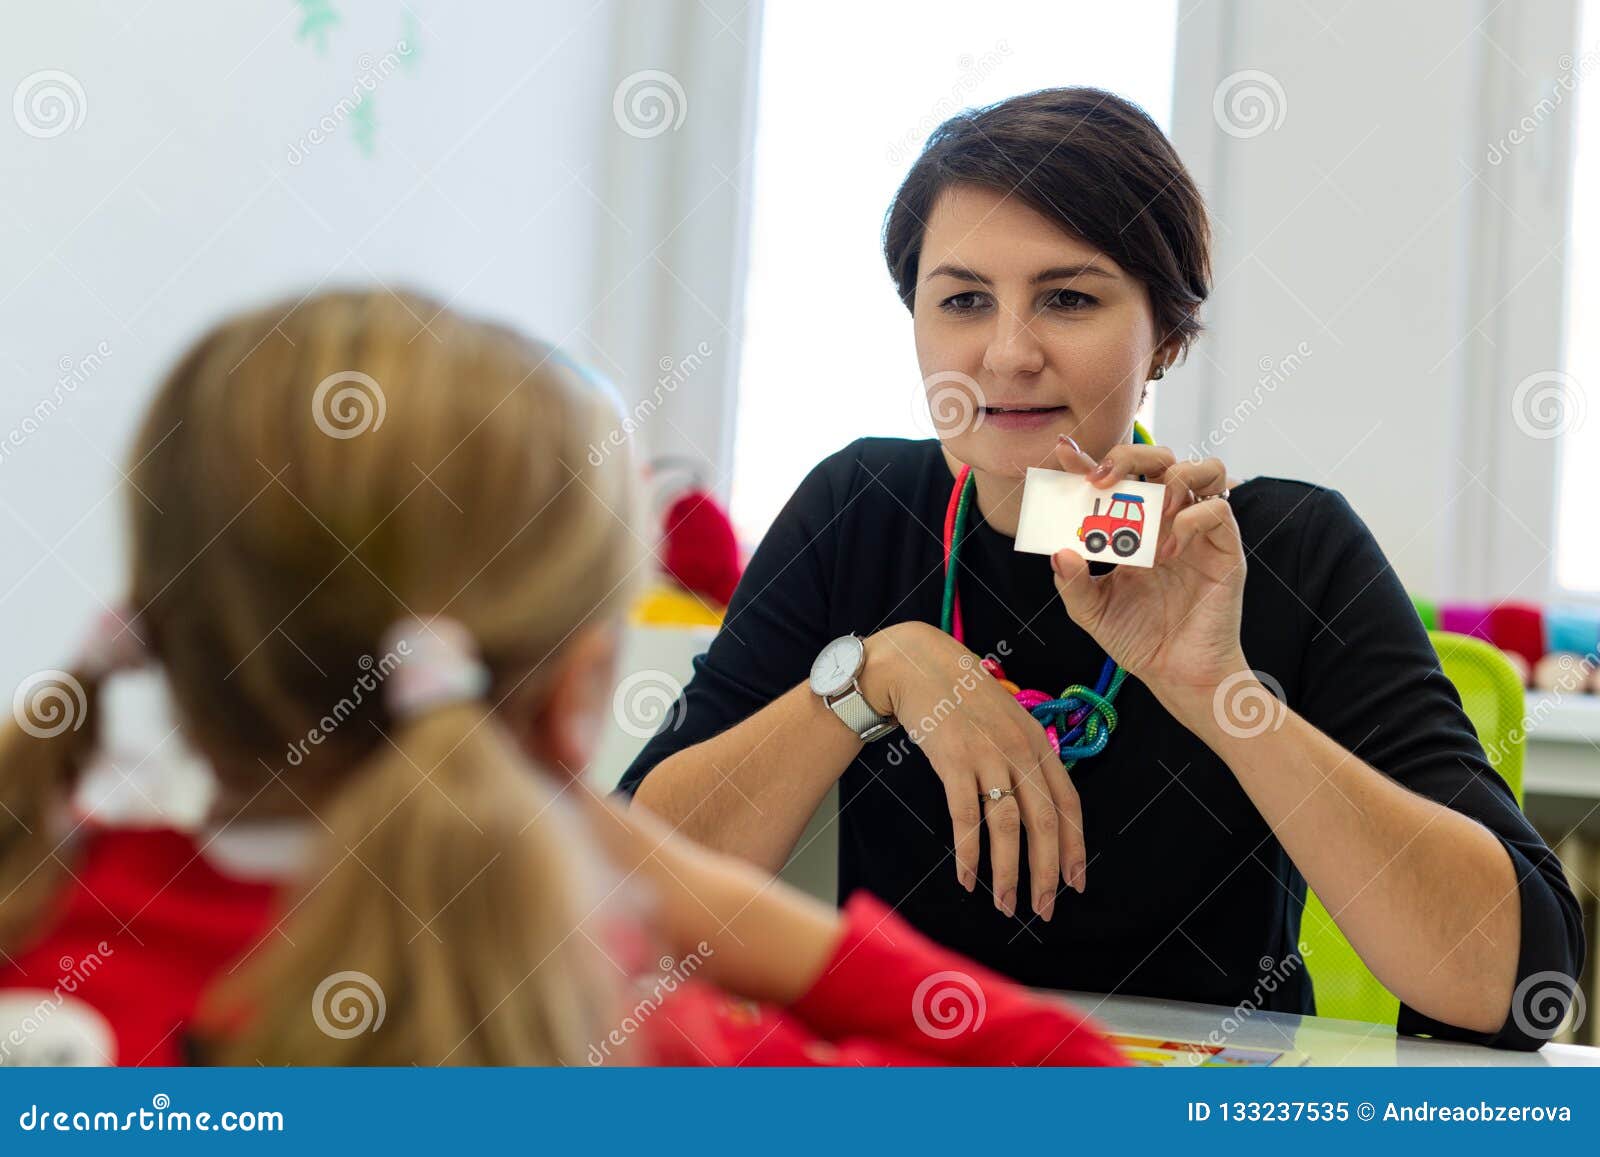 ary age girl in child occupational therapy session doing playful exercises with her therapist.